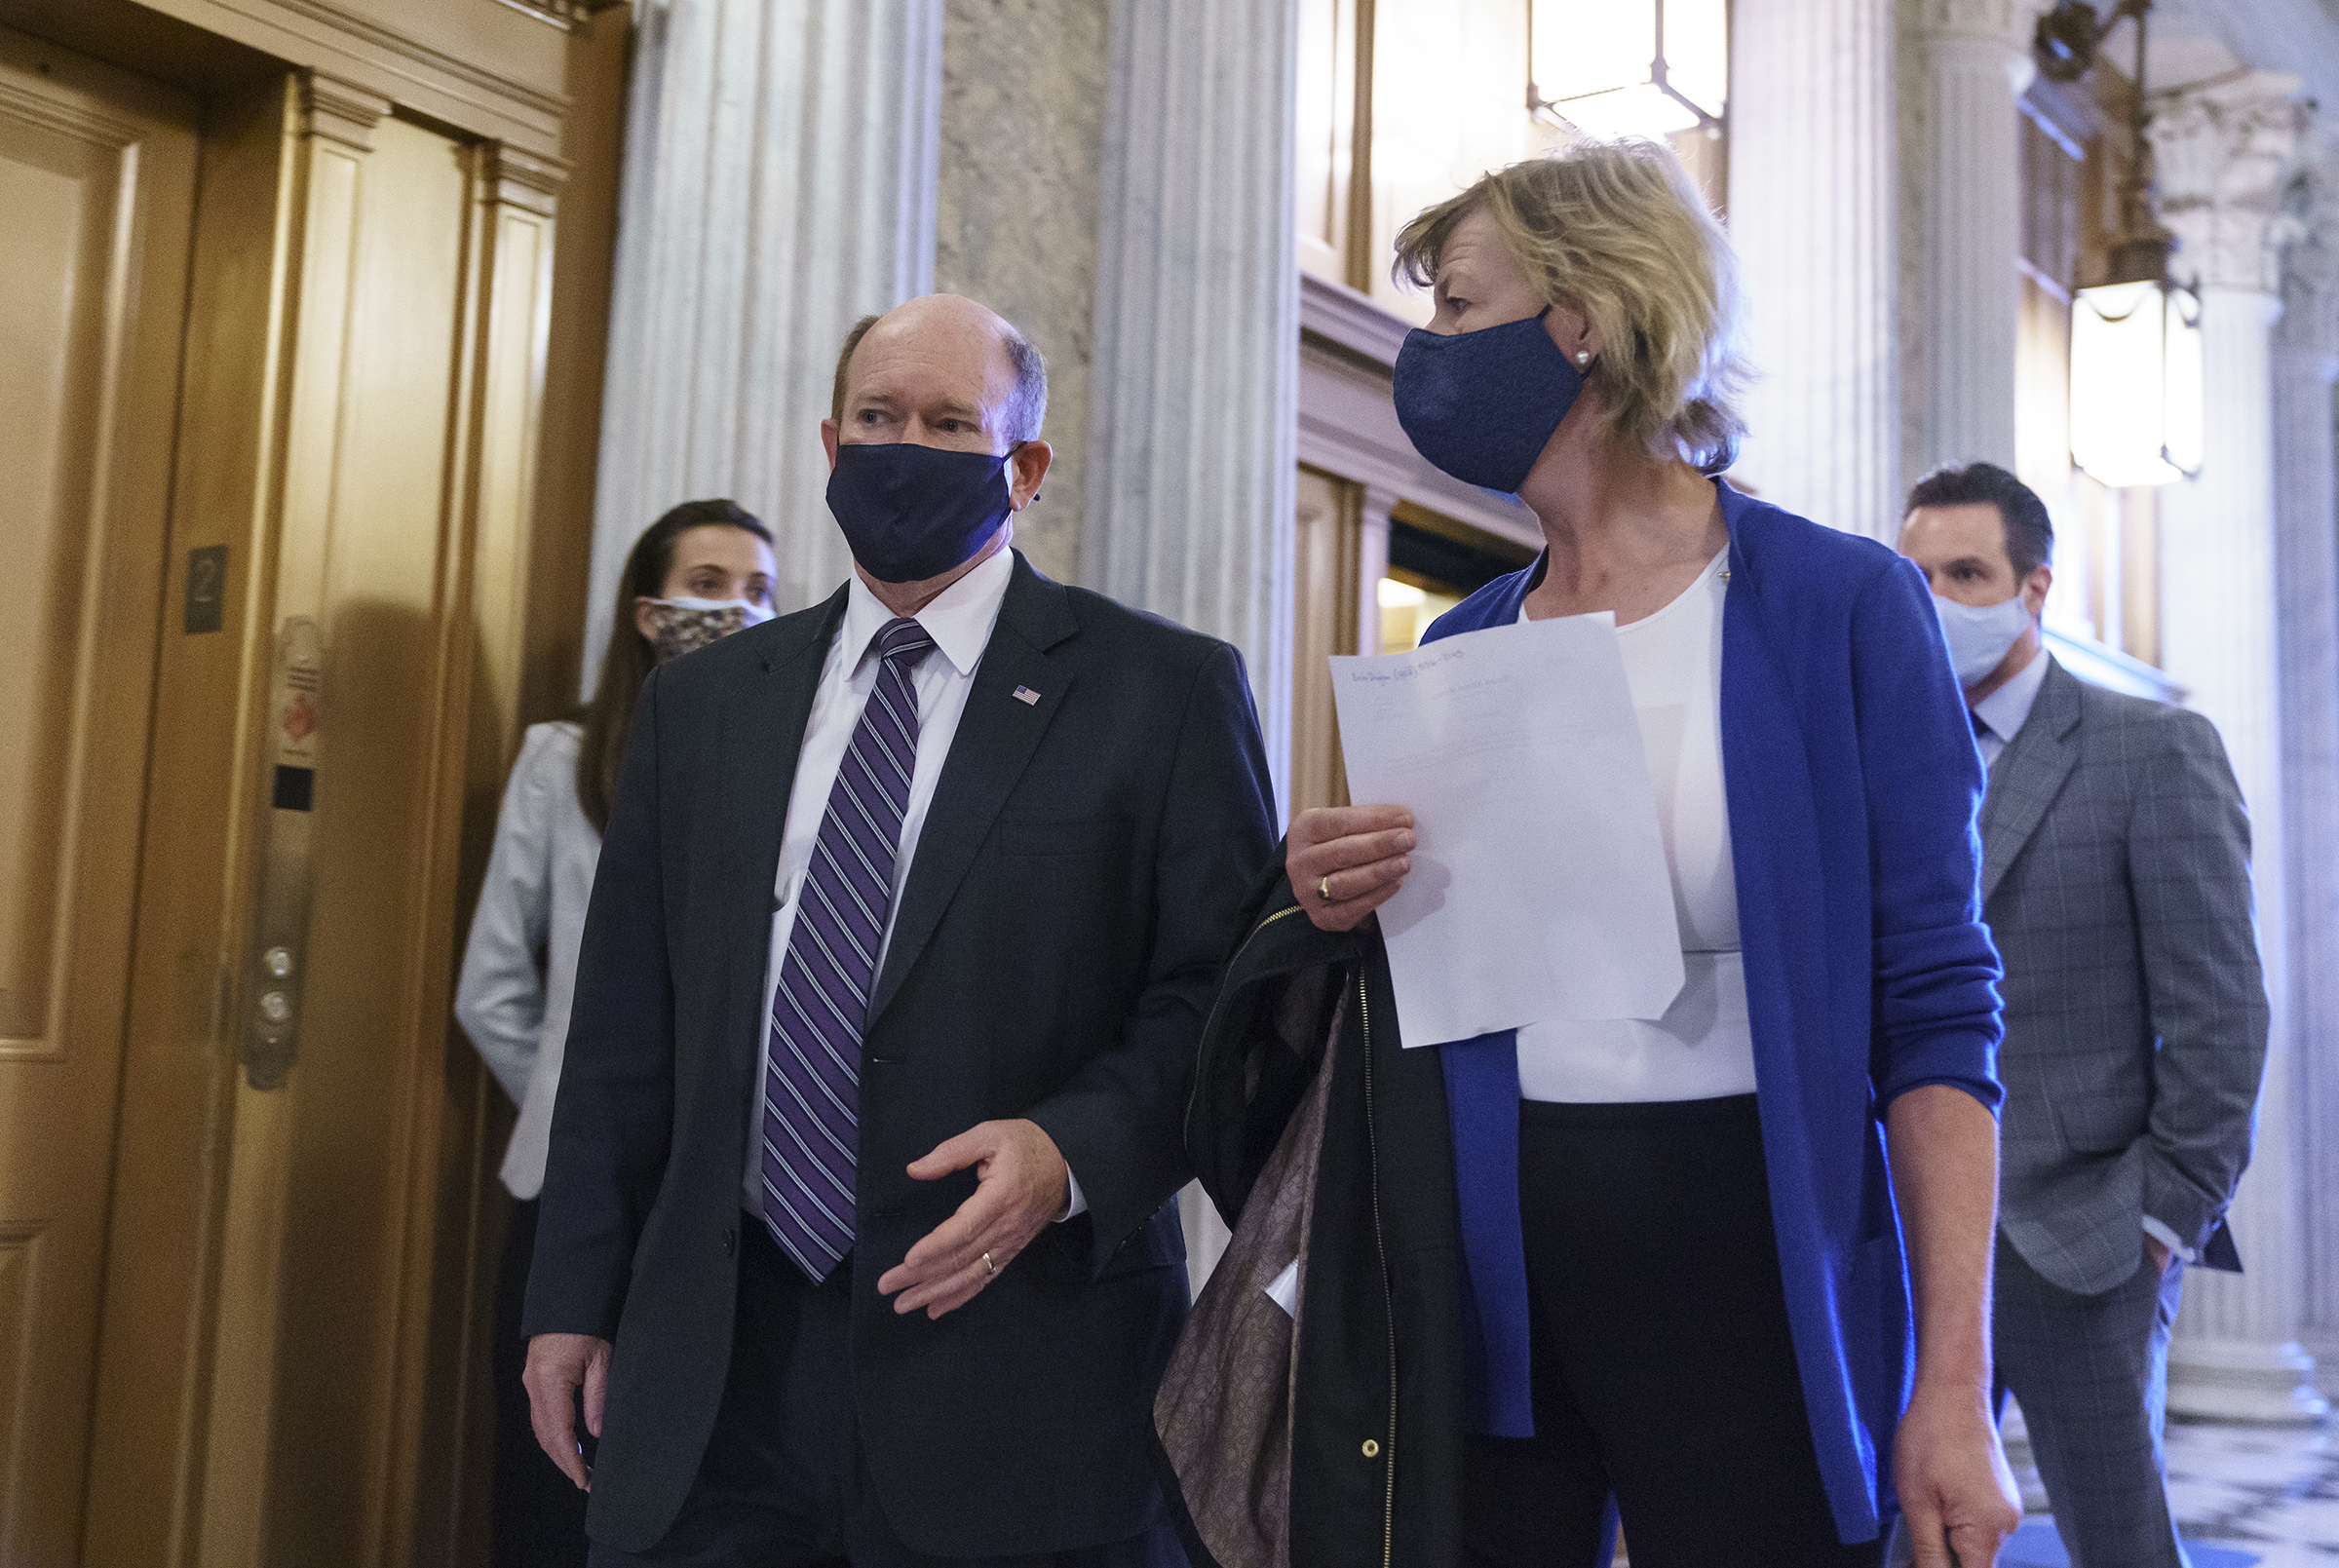 Chris Coons and Tammy Baldwin walk in a hallway wearing masks